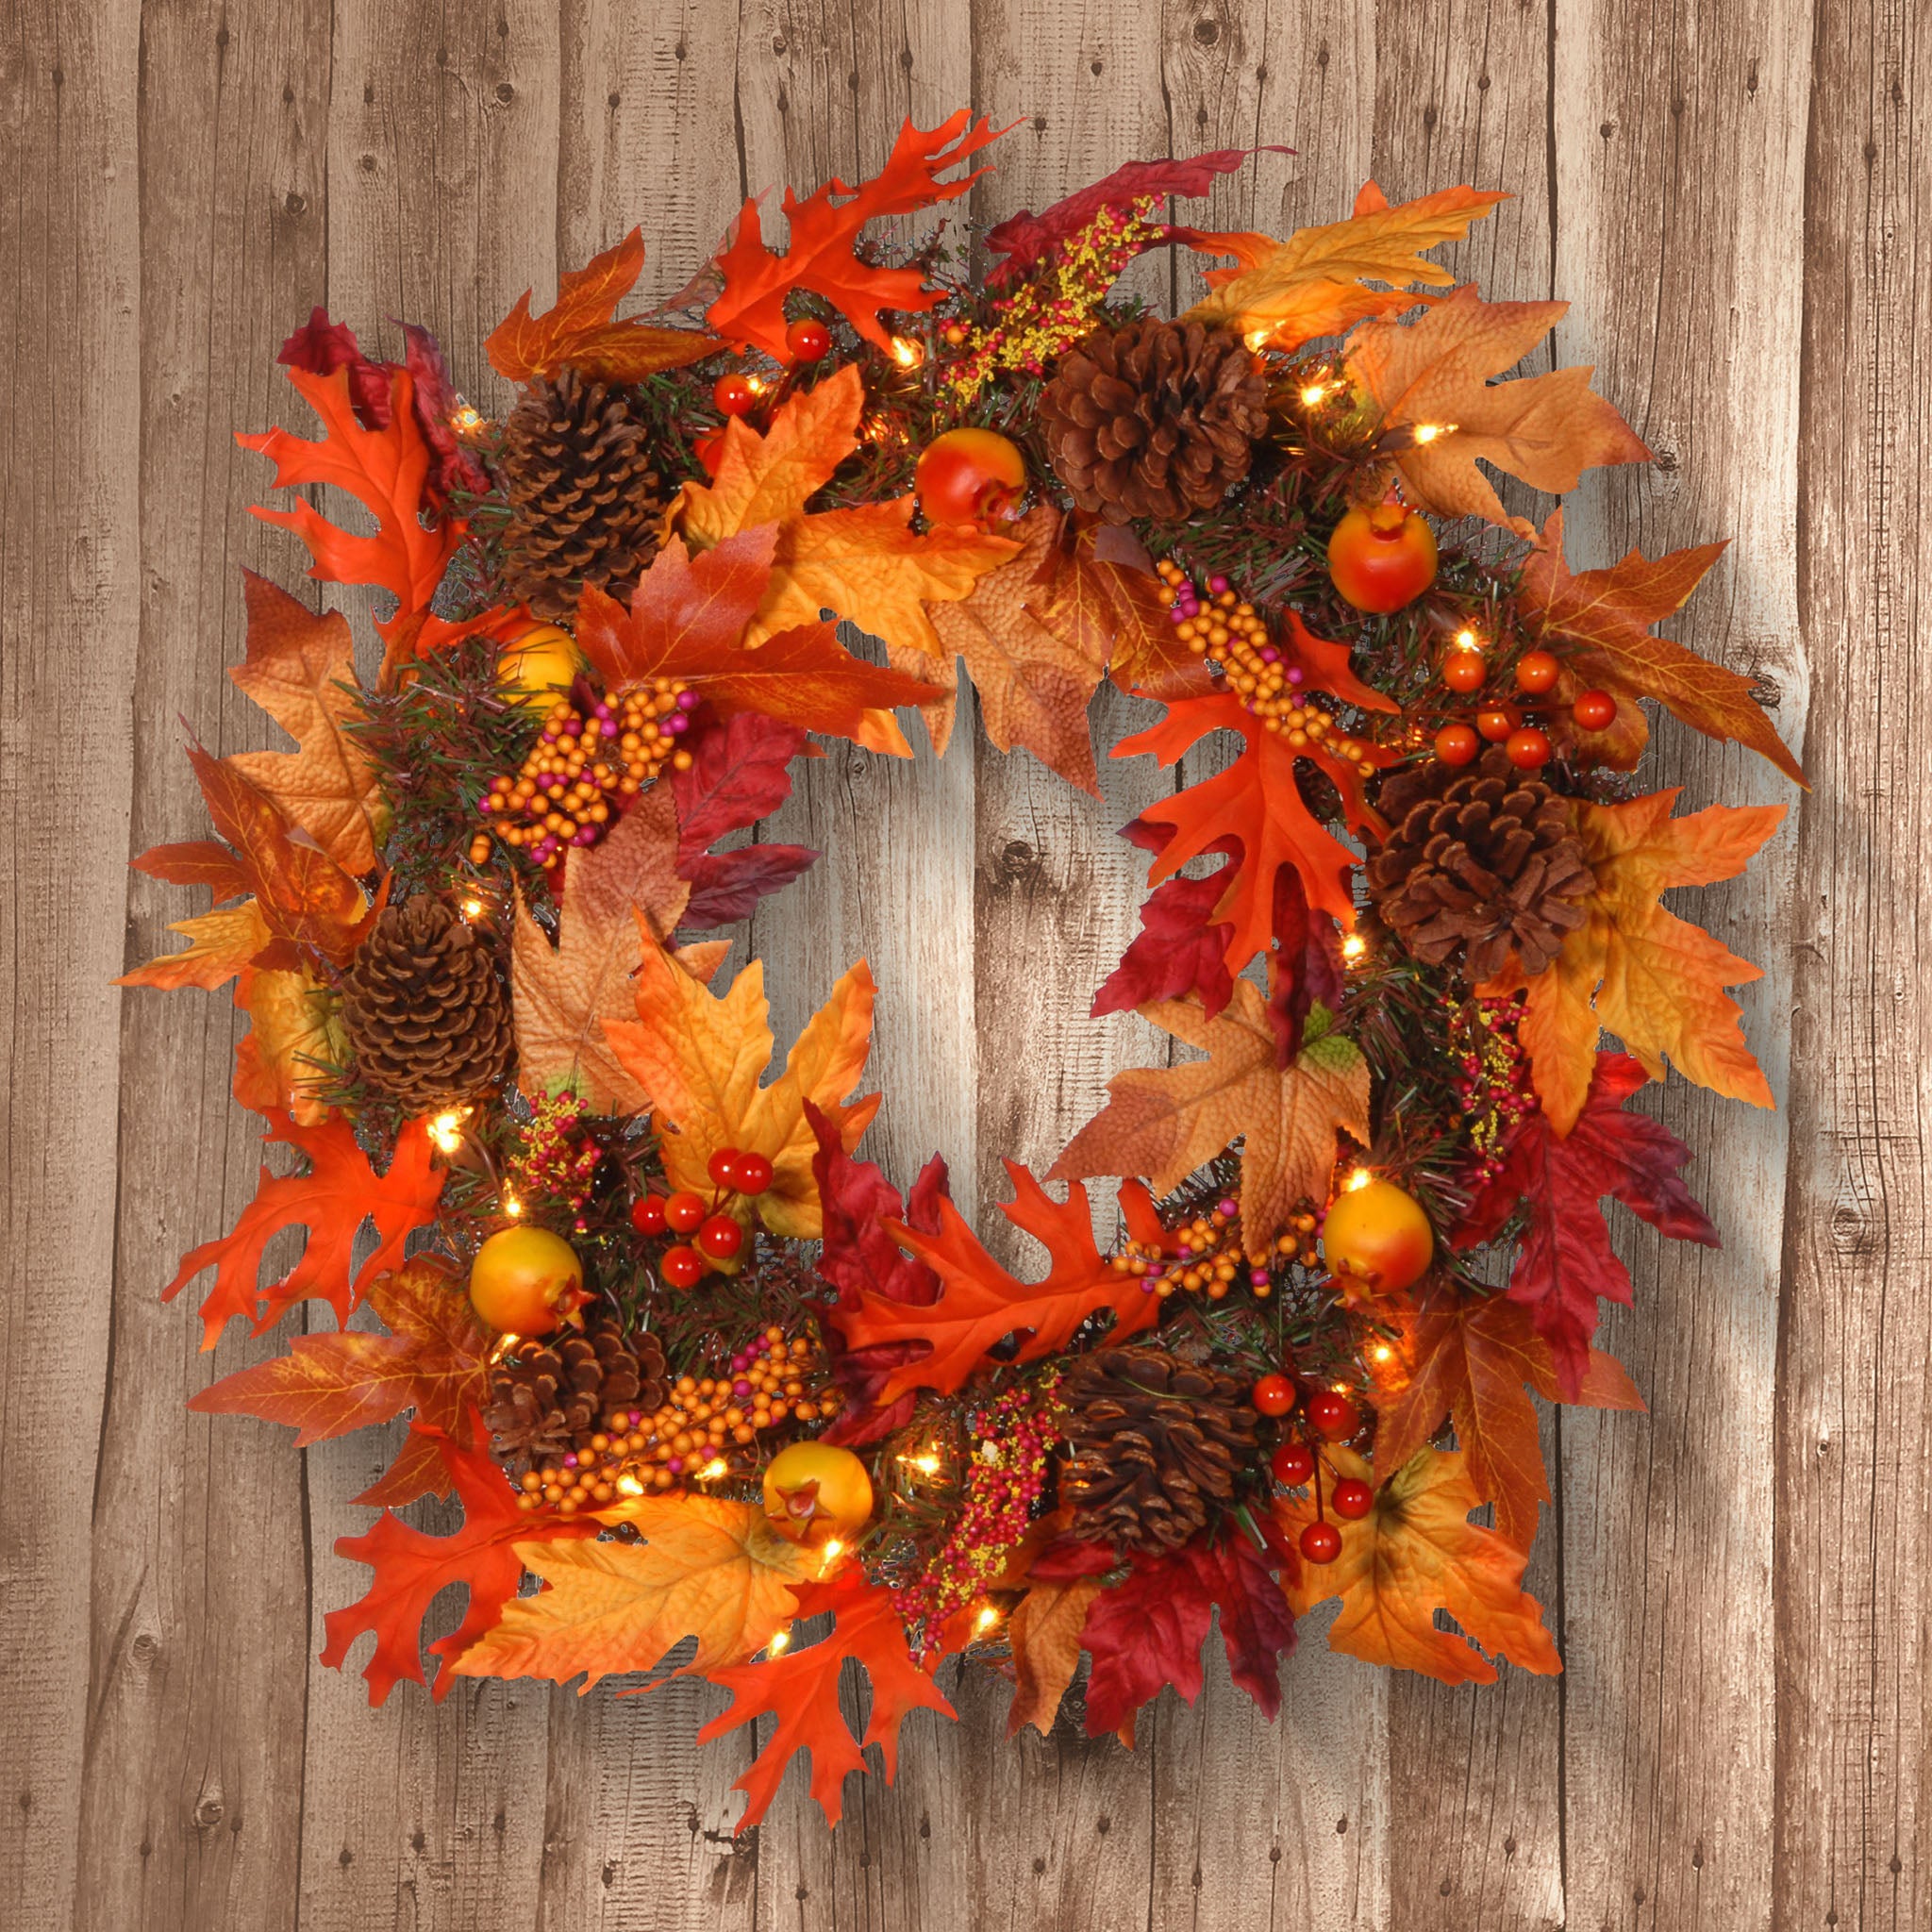 National Tree Company Pre-Lit Artificial Autumn Wreath, Decorated with Gourds, Pinecones, Maple Leaves, Berry Clusters and Lights, Autumn Collection, 24 in